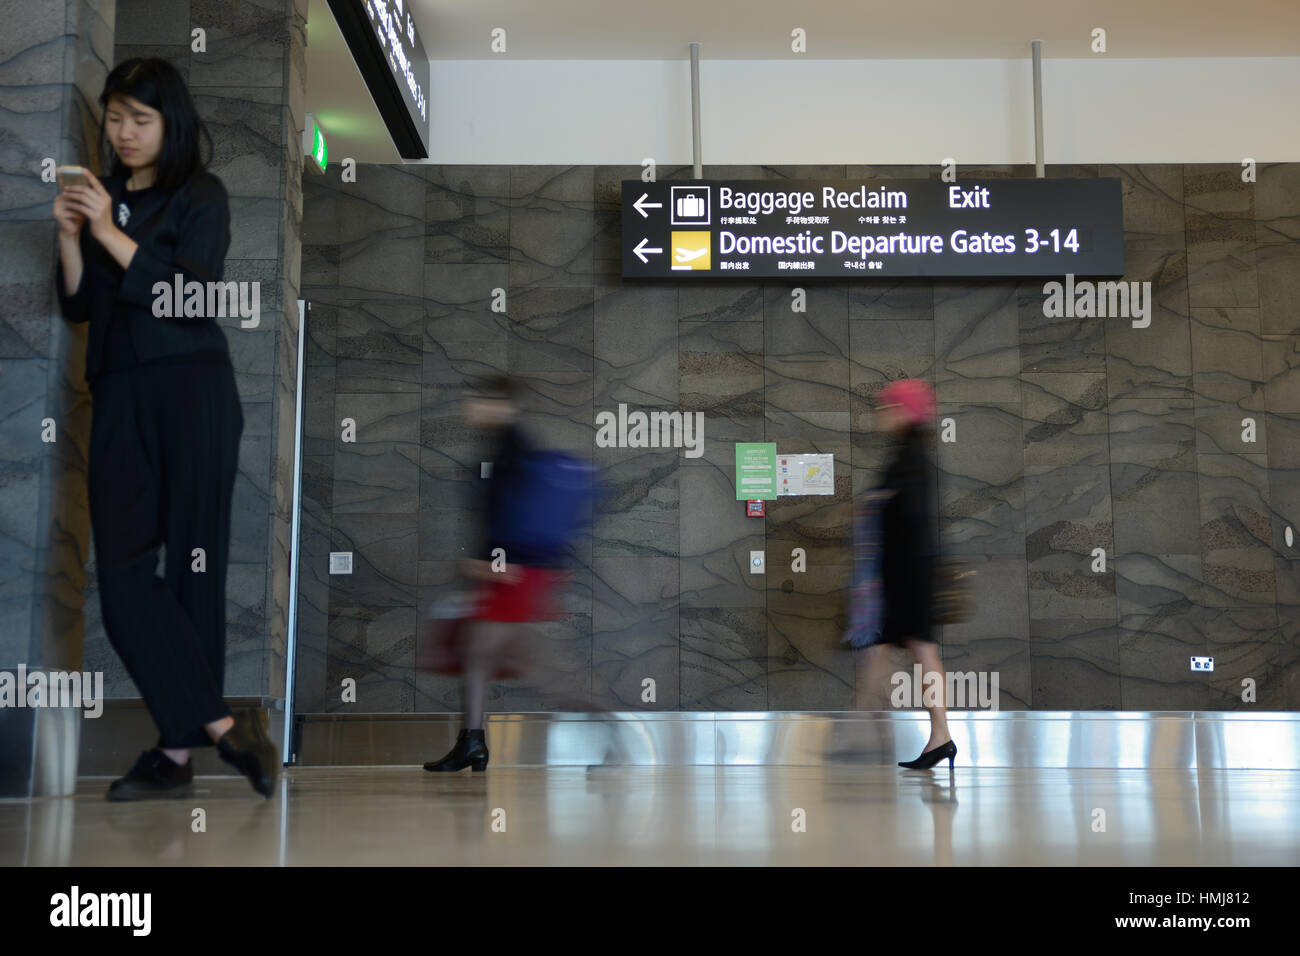 Passengers head for the domestic departures gate at an airport. Slow shutter speed for blurred motion. Stock Photo